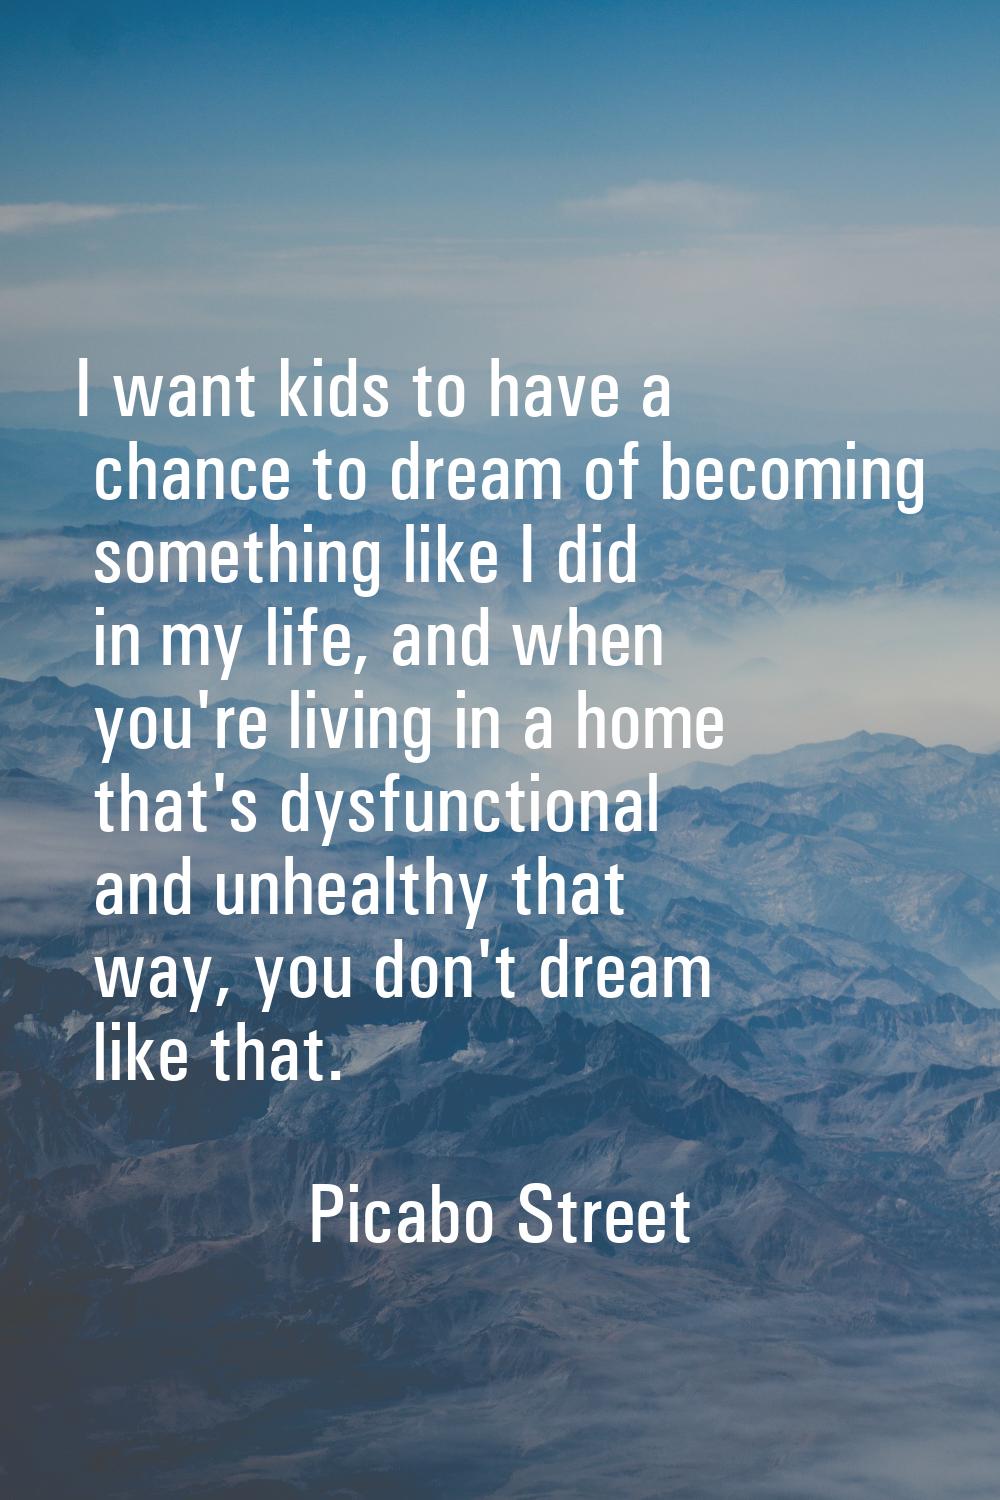 I want kids to have a chance to dream of becoming something like I did in my life, and when you're 